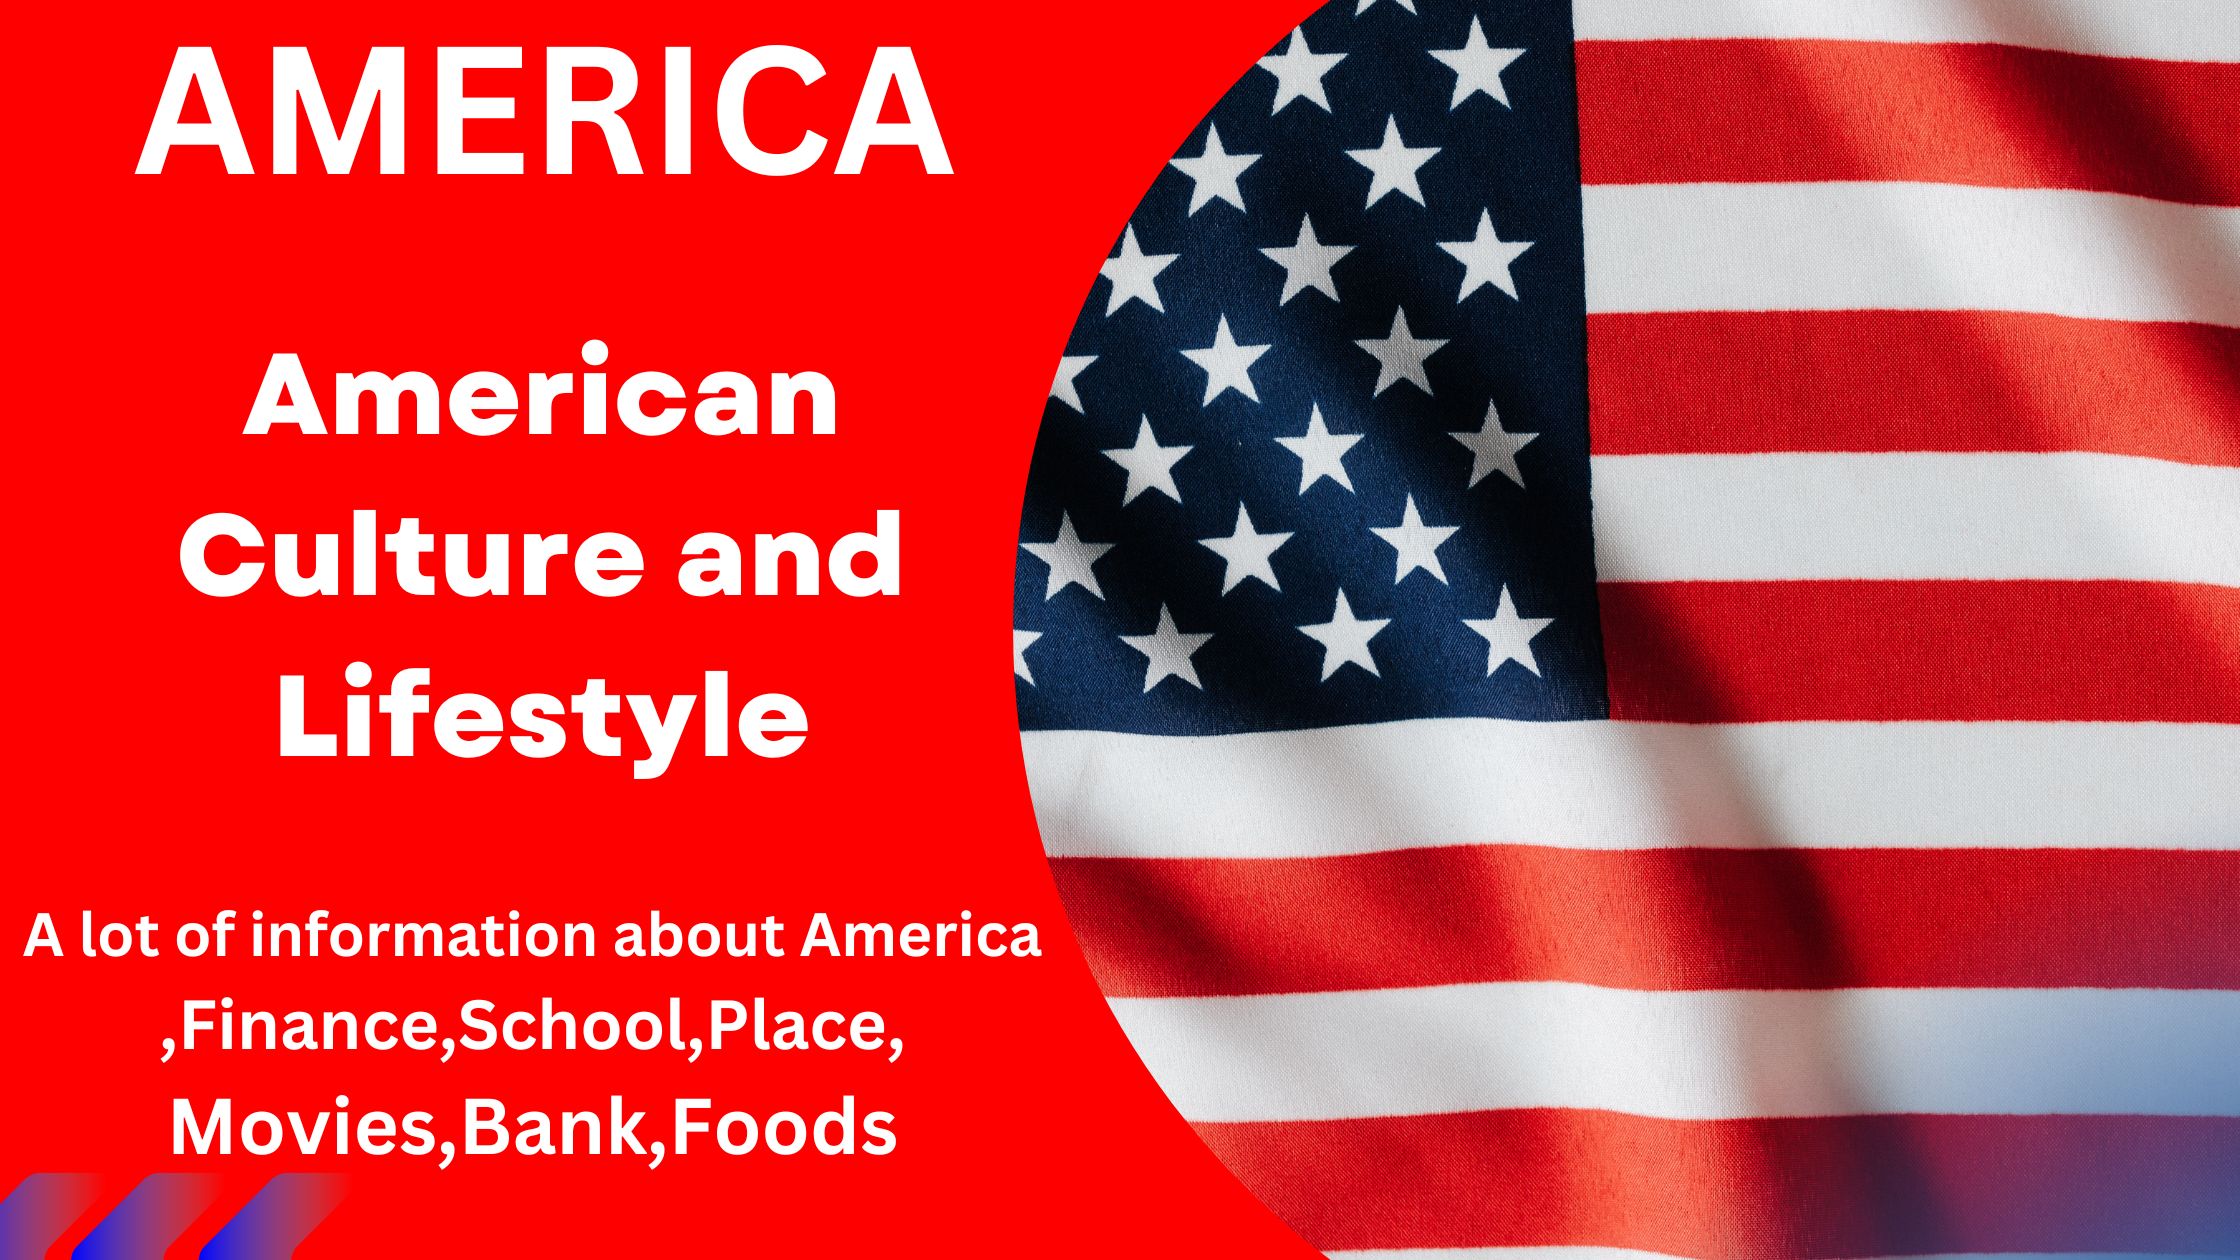 American Culture and Lifestyle A lot of information about America,Finance,School,Place,Movies,Bank,Foods  Bank of America, image